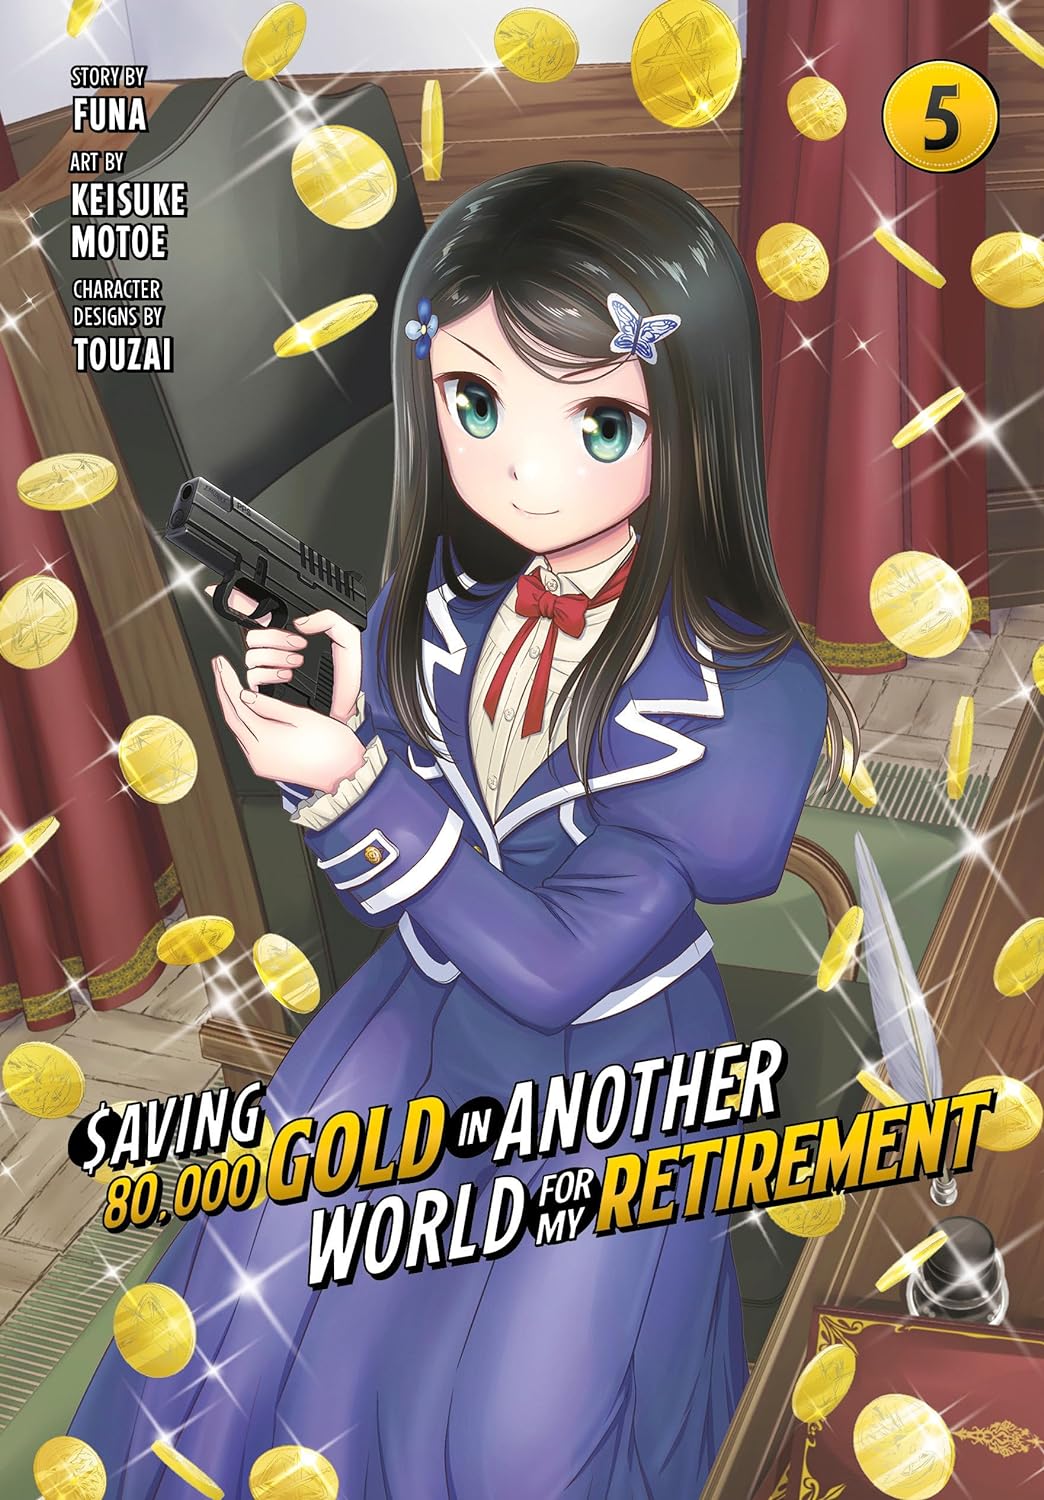 Saving 80,000 Gold in Another World for My Retirement (Manga) Vol. 05